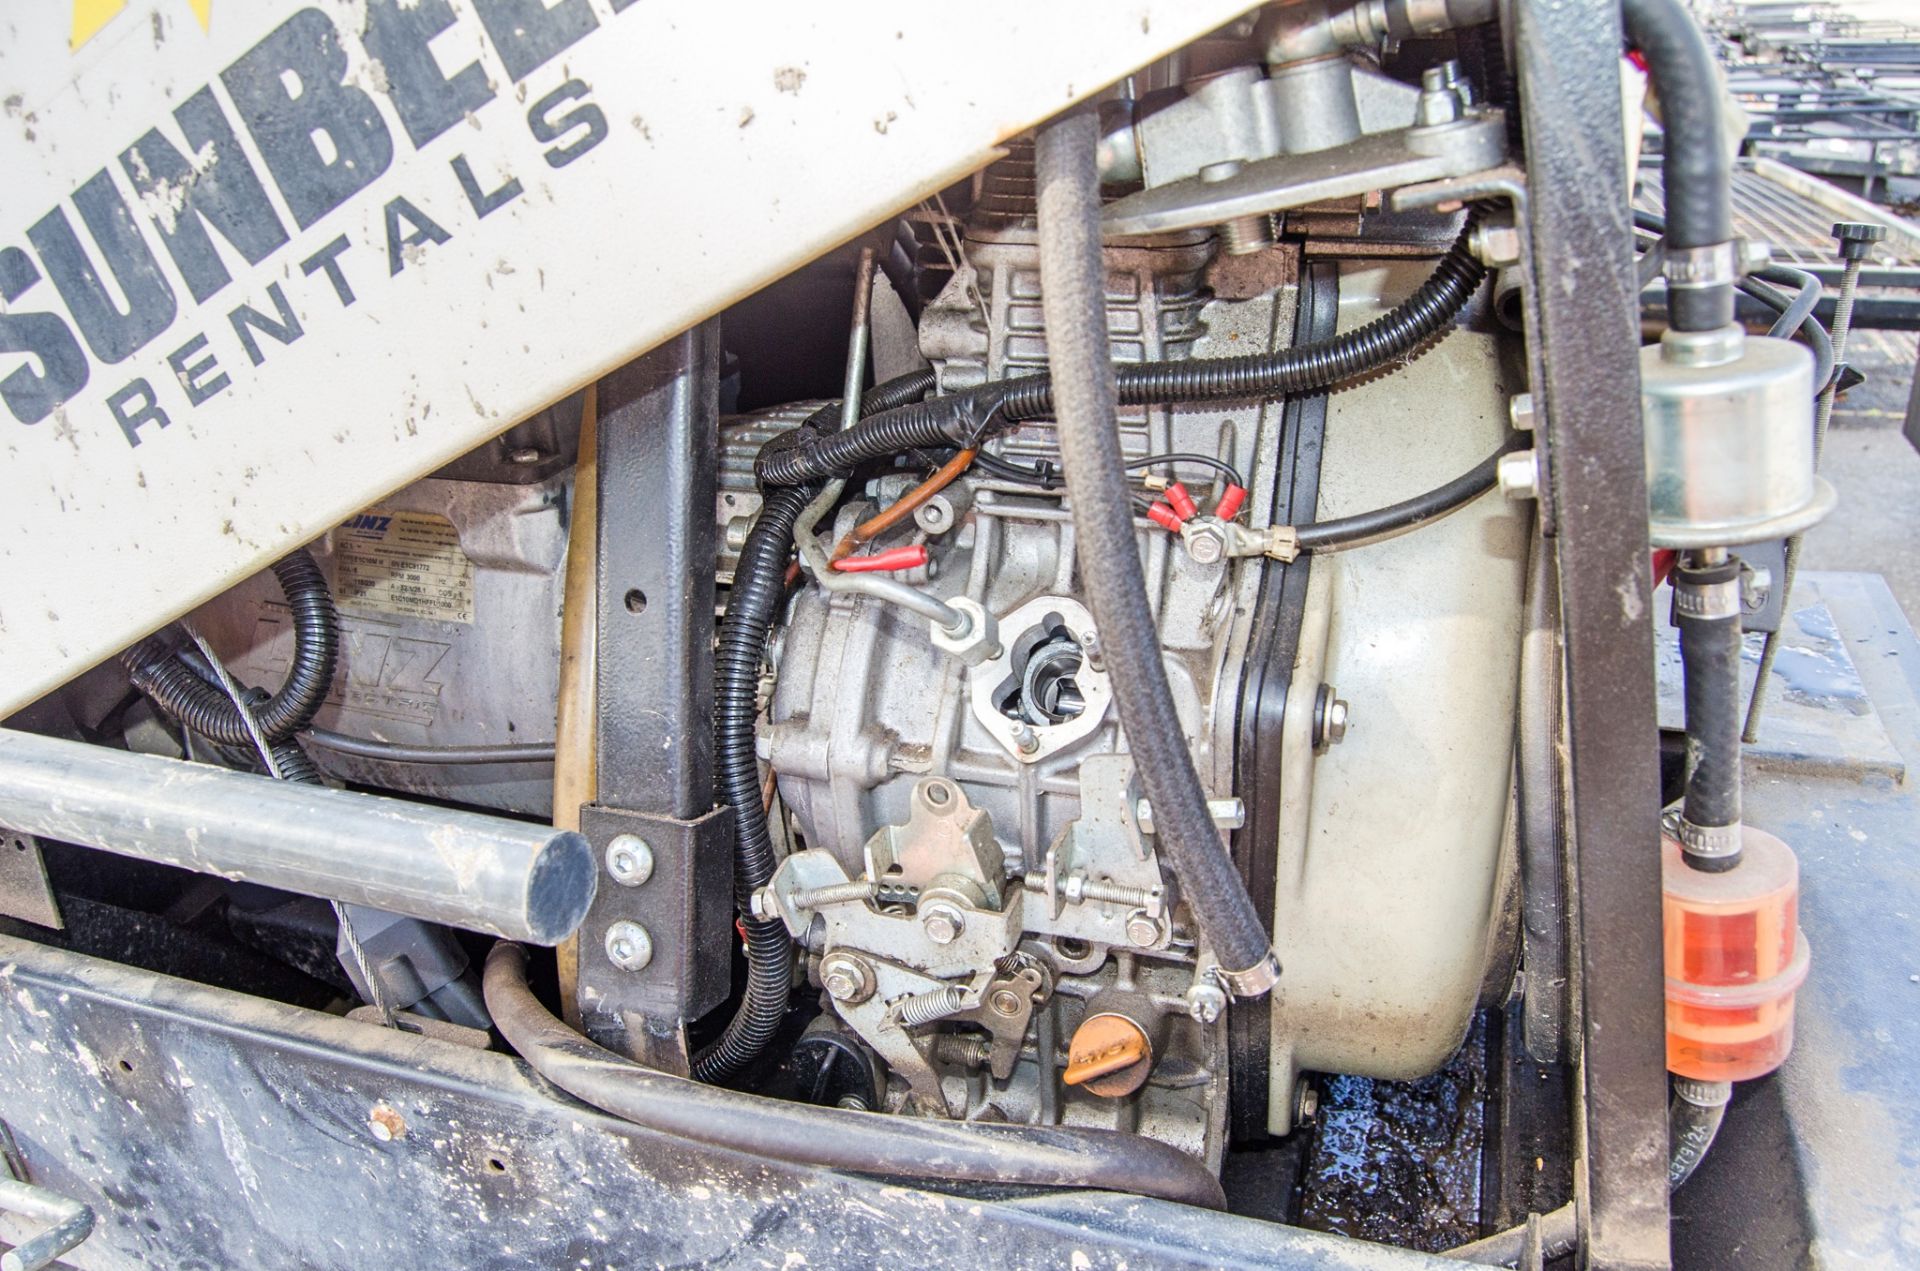 MHM MGTP 6000 SS-Y 6 kva diesel driven generator S/N: 226190049 ** Engine parts missing ** A1091986 - Image 5 of 5